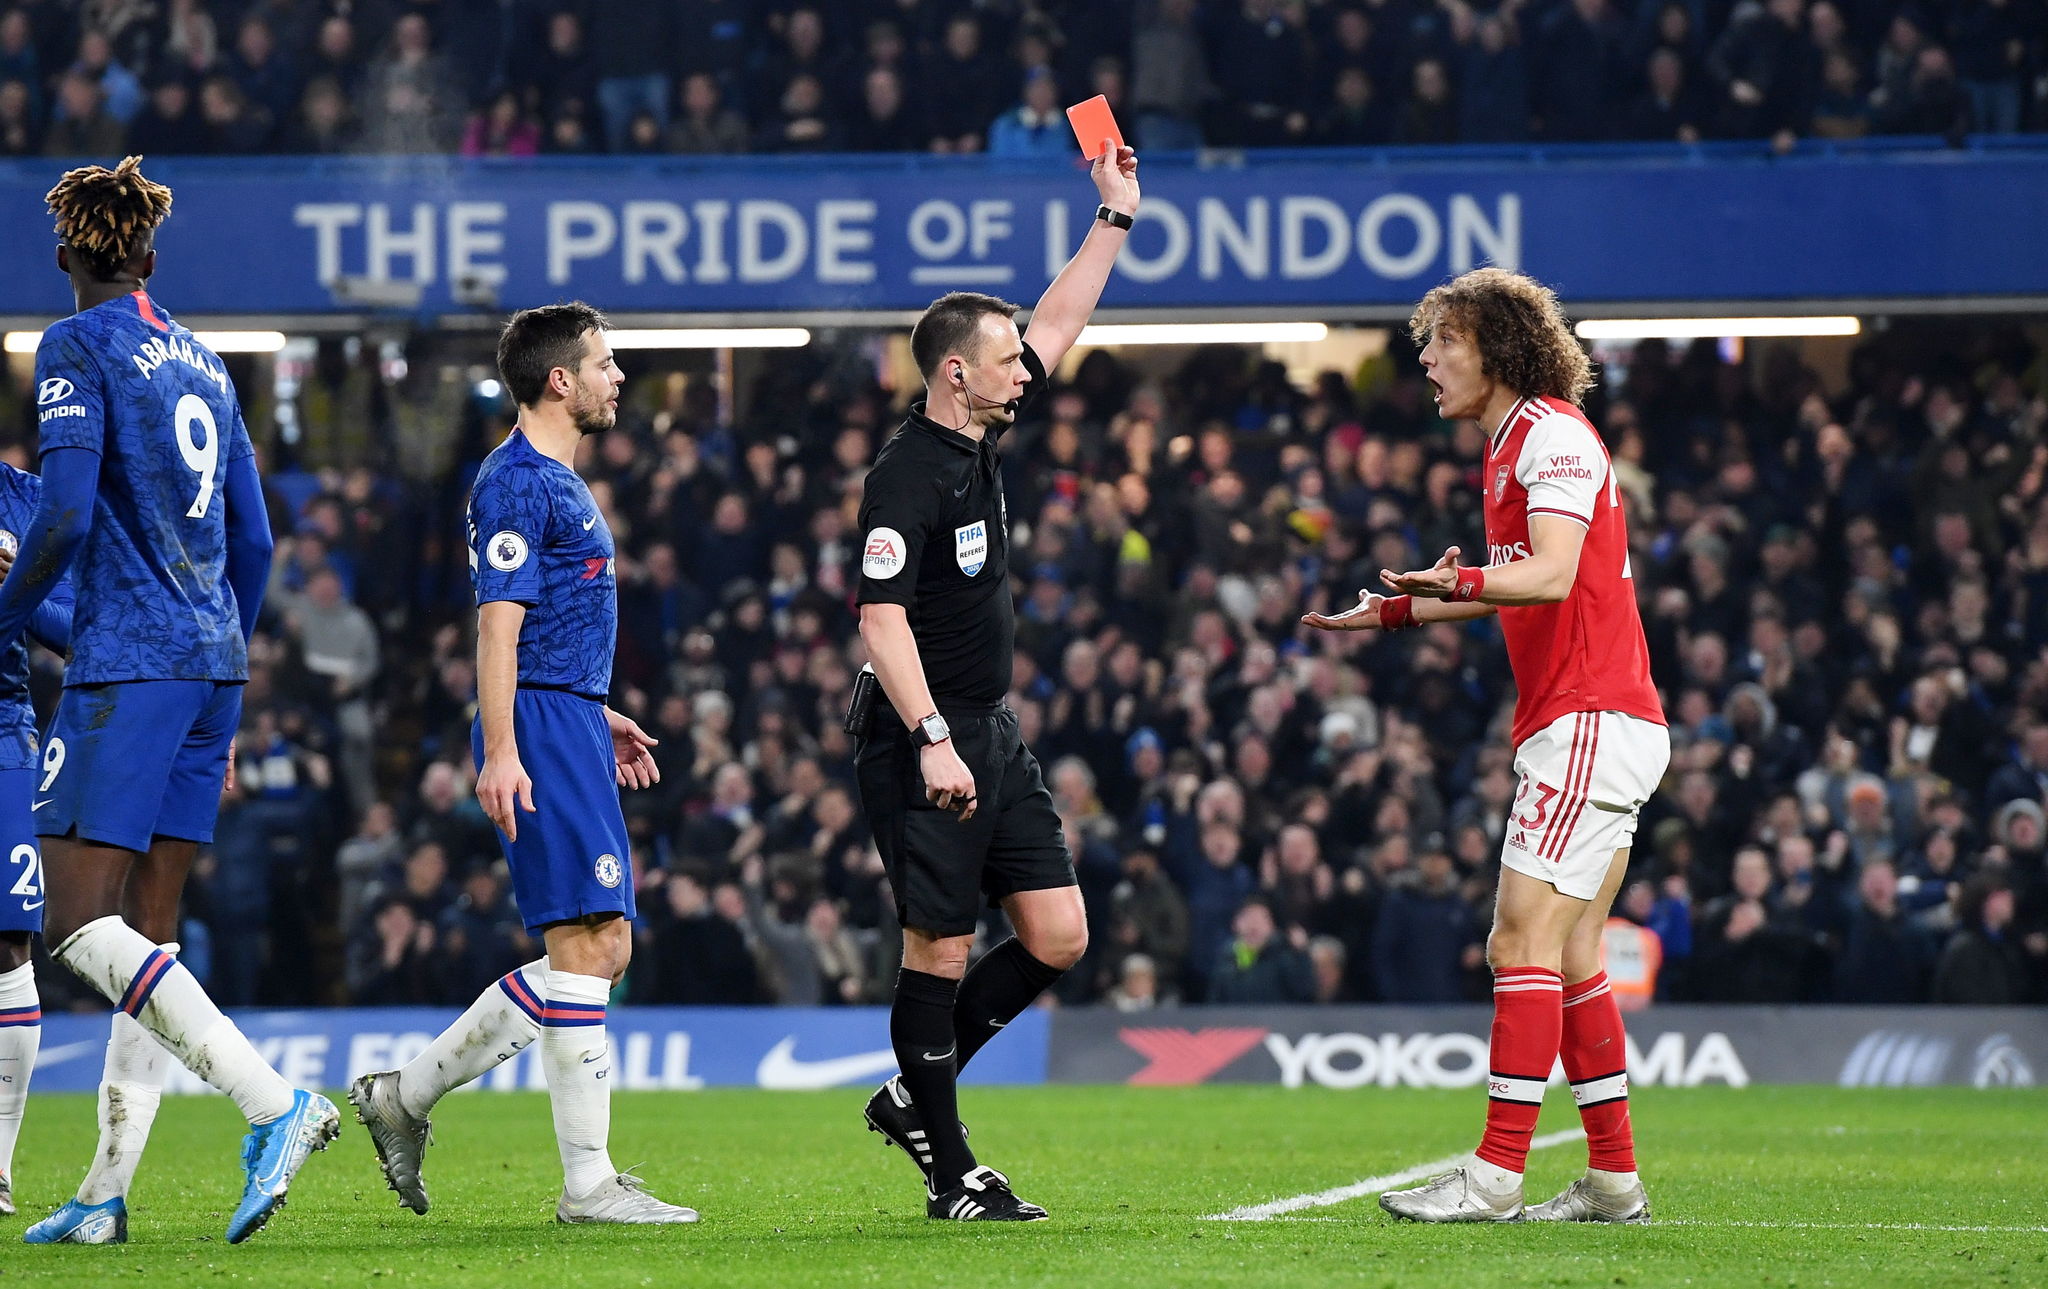 London (United Kingdom), 21/01/2020.- <HIT>David</HIT><HIT>Luiz</HIT> (R) of Arsenal is shown the red card by referee Stuart Attwell during the English Premier League match between Chelsea and Arsenal in London, Britain, 21 January 2020. (Reino Unido, Londres) EFE/EPA/ANDY RAIN No use with unauthorized audio, video, data, fixture lists, club/league logos or live services. Online in-match use limited to 120 images, no video emulation. No use in betting, games or single club/league/player publications. EDITORIAL USE ONLY EDITORIAL USE ONLY EDITORIAL USE ONLY EDITORIAL USE ONLY